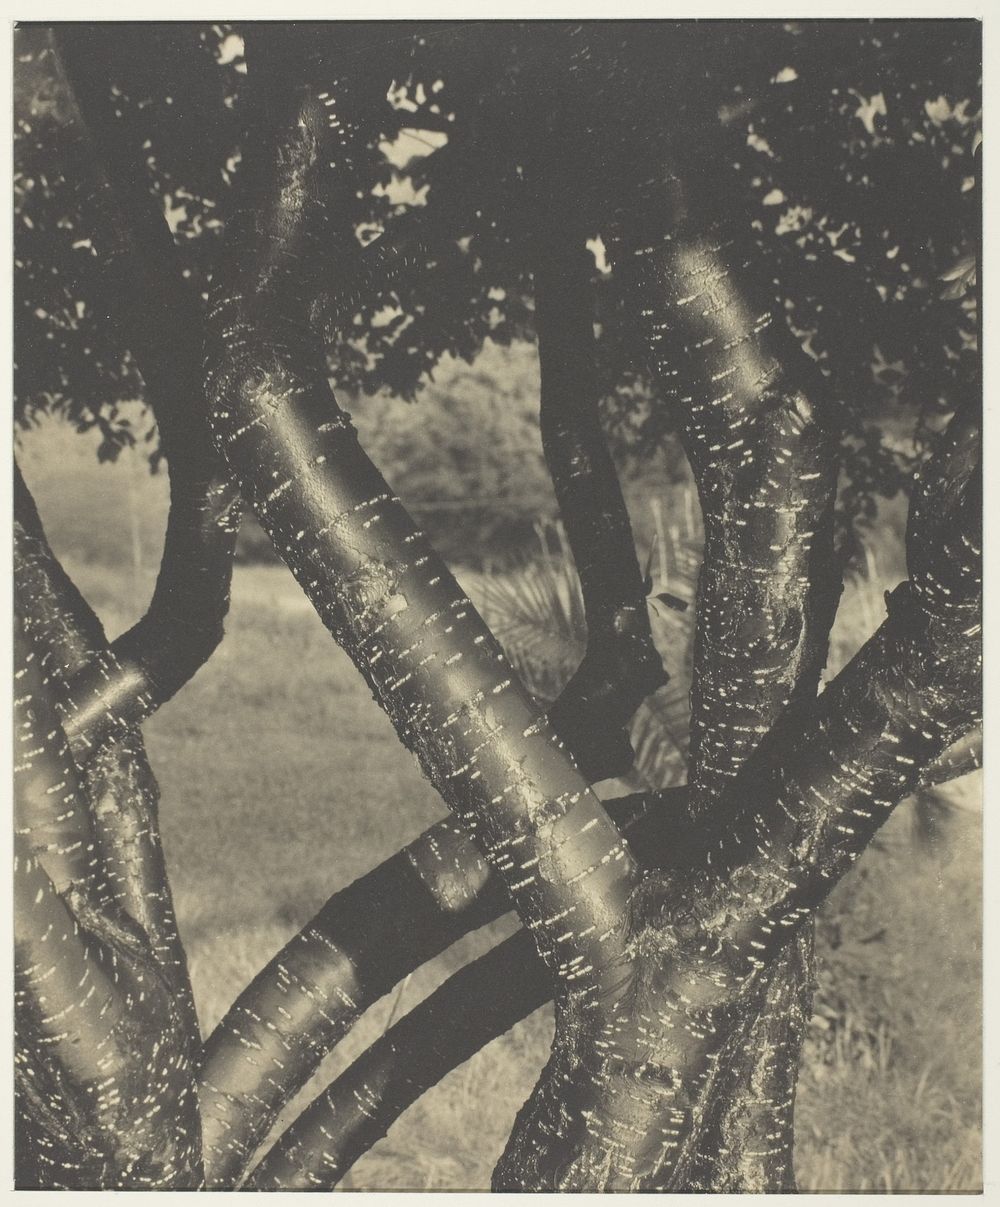 The Dancing Trees (1922) by Alfred Stieglitz.  